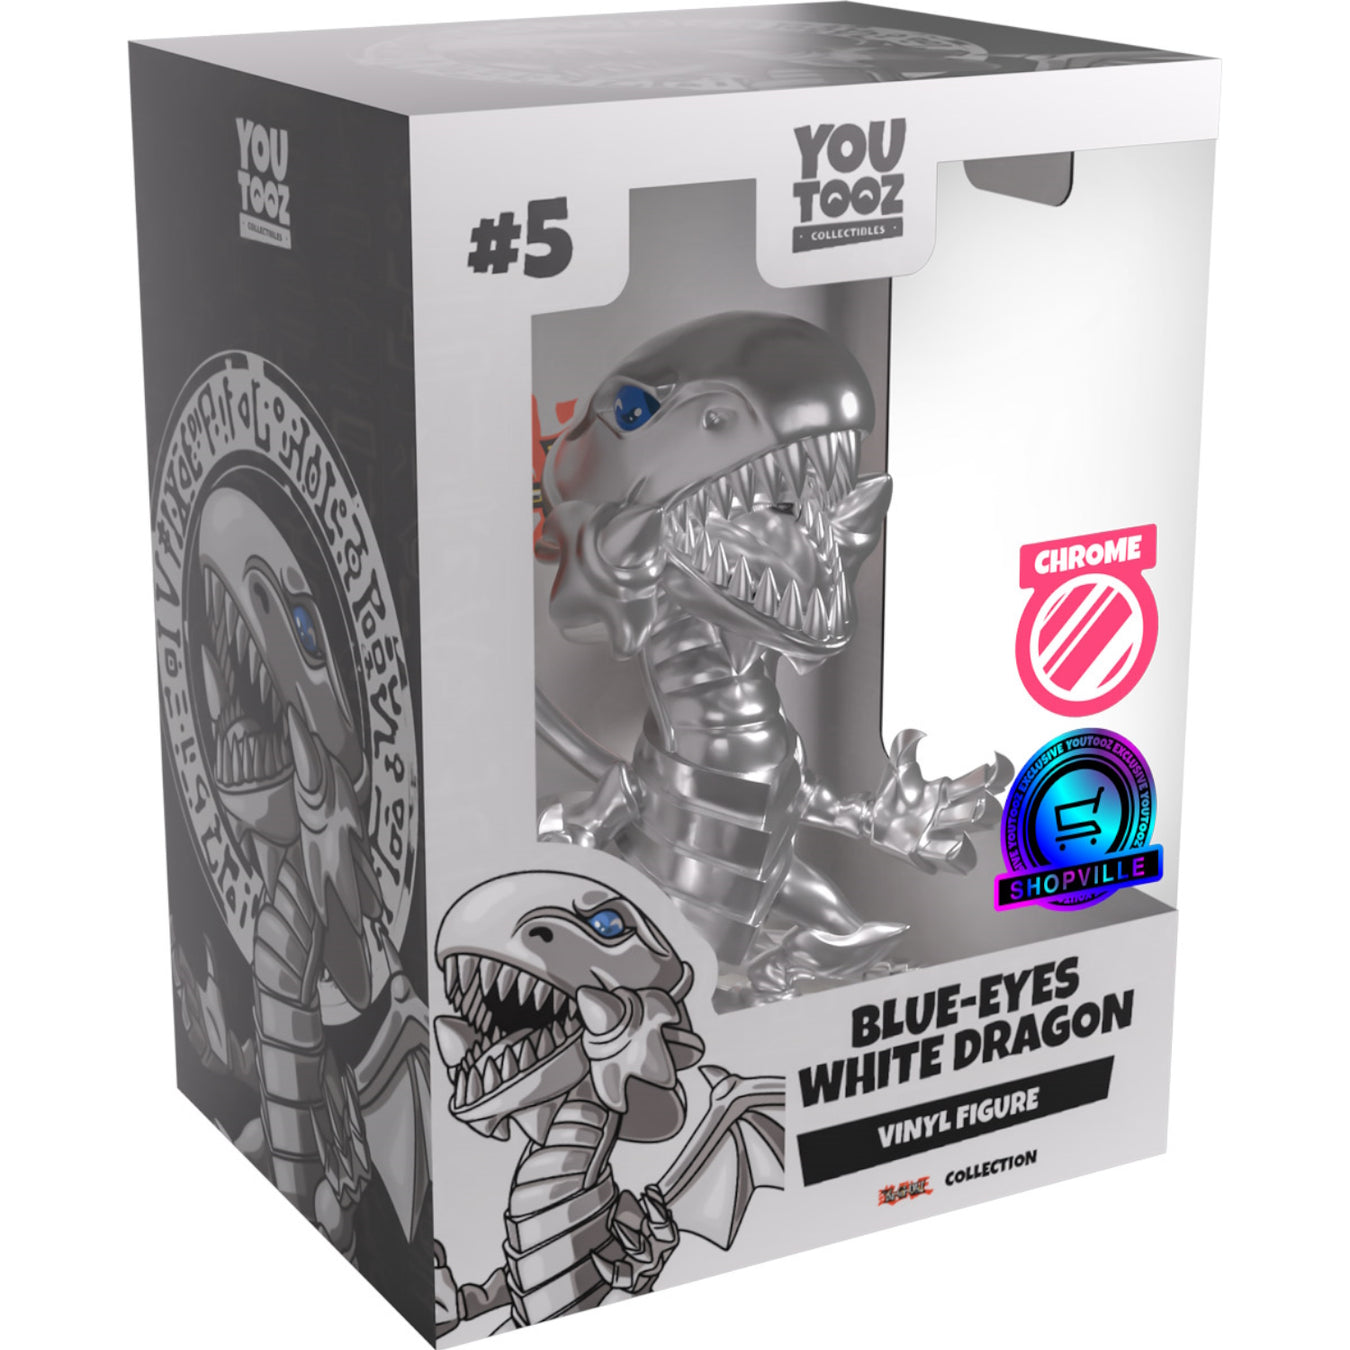 Youtooz x Shopville: Yu-Gi-Oh Collection - Chrome Blue-Eyes White Dragon - Vinyl Figure #5 [Limited Edition - 750 Only!] Toys & Games Youtooz   